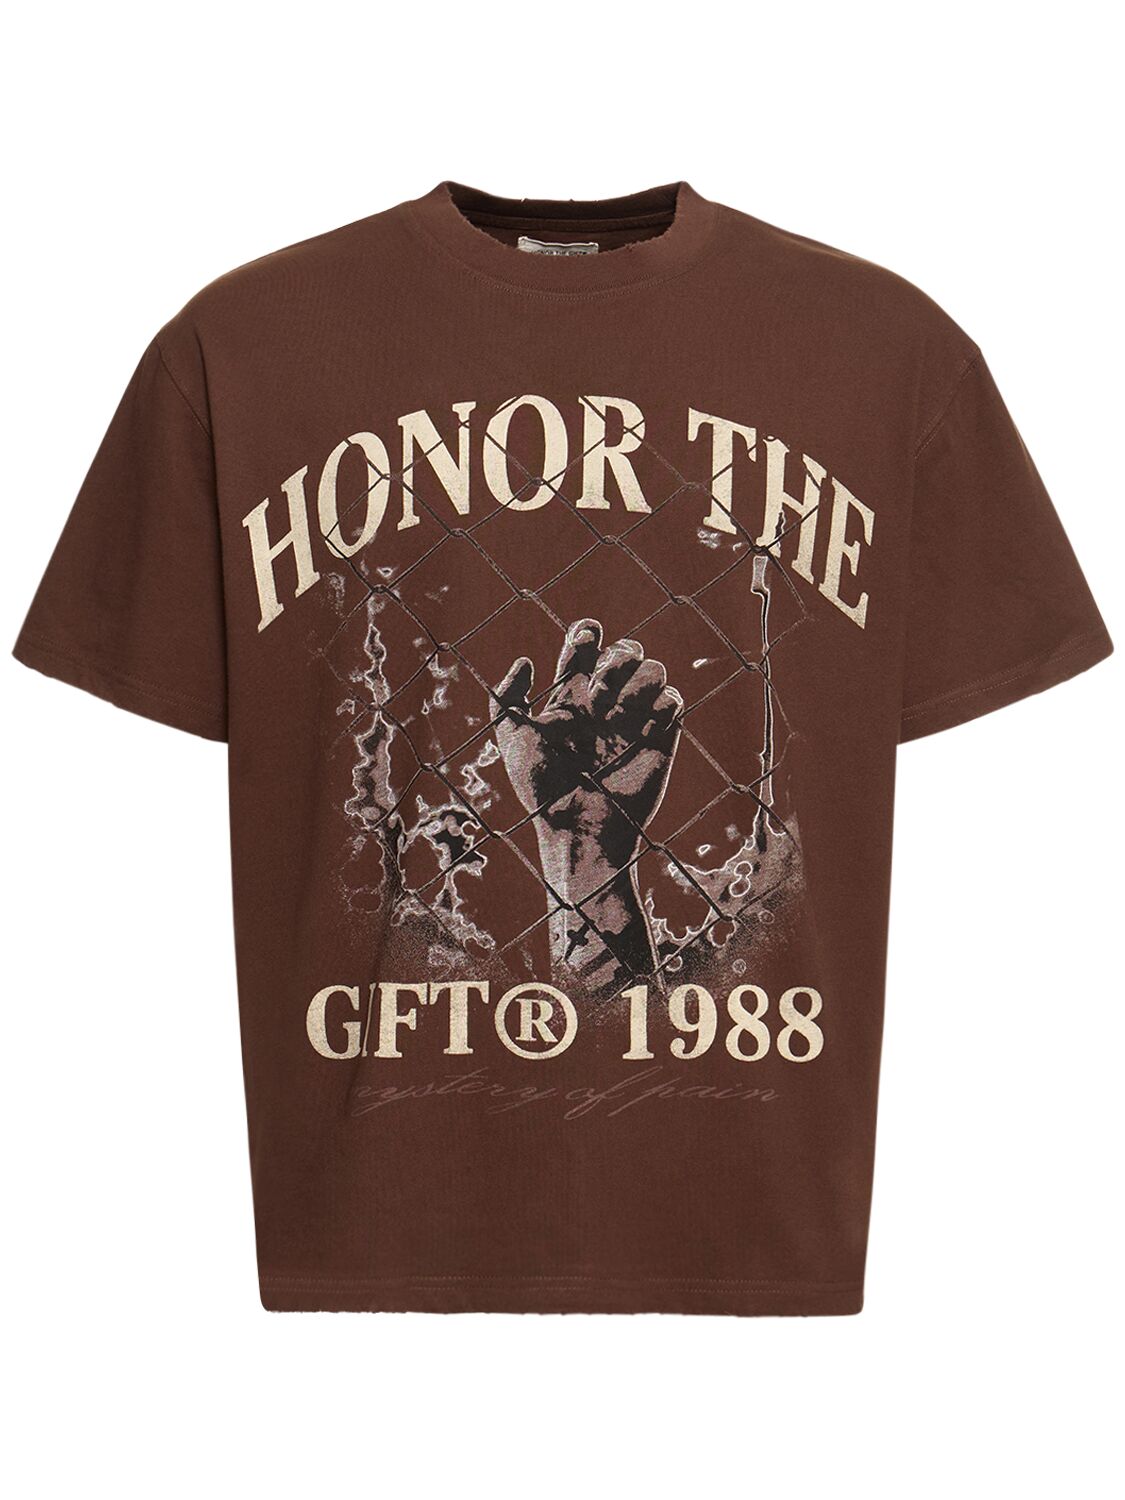 HONOR THE GIFT MYSTERY OF PAIN T-SHIRT